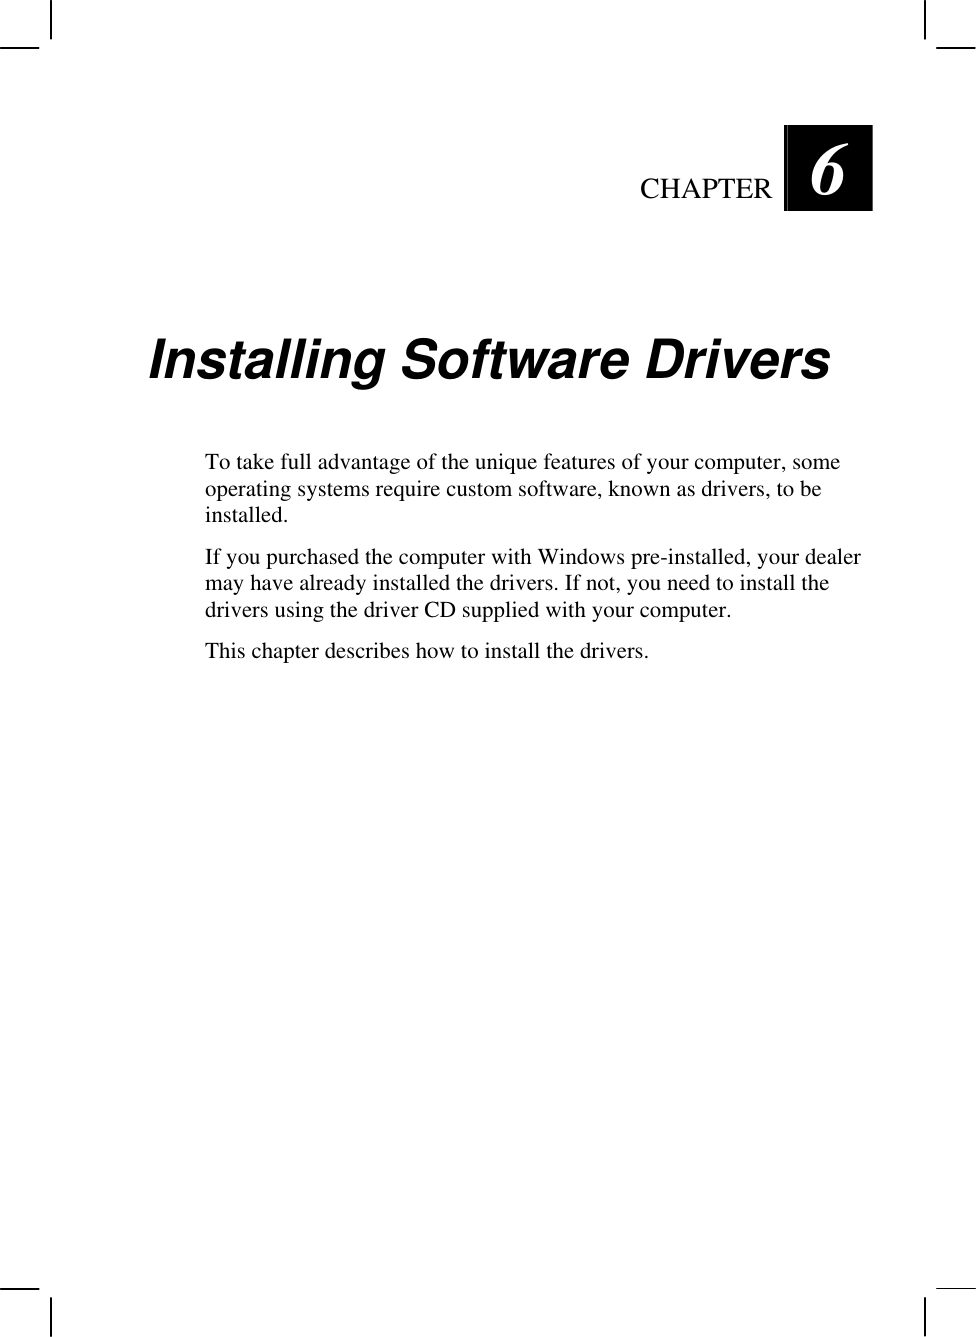   CHAPTER  6 Installing Software Drivers To take full advantage of the unique features of your computer, some operating systems require custom software, known as drivers, to be installed. If you purchased the computer with Windows pre-installed, your dealer may have already installed the drivers. If not, you need to install the drivers using the driver CD supplied with your computer. This chapter describes how to install the drivers.   